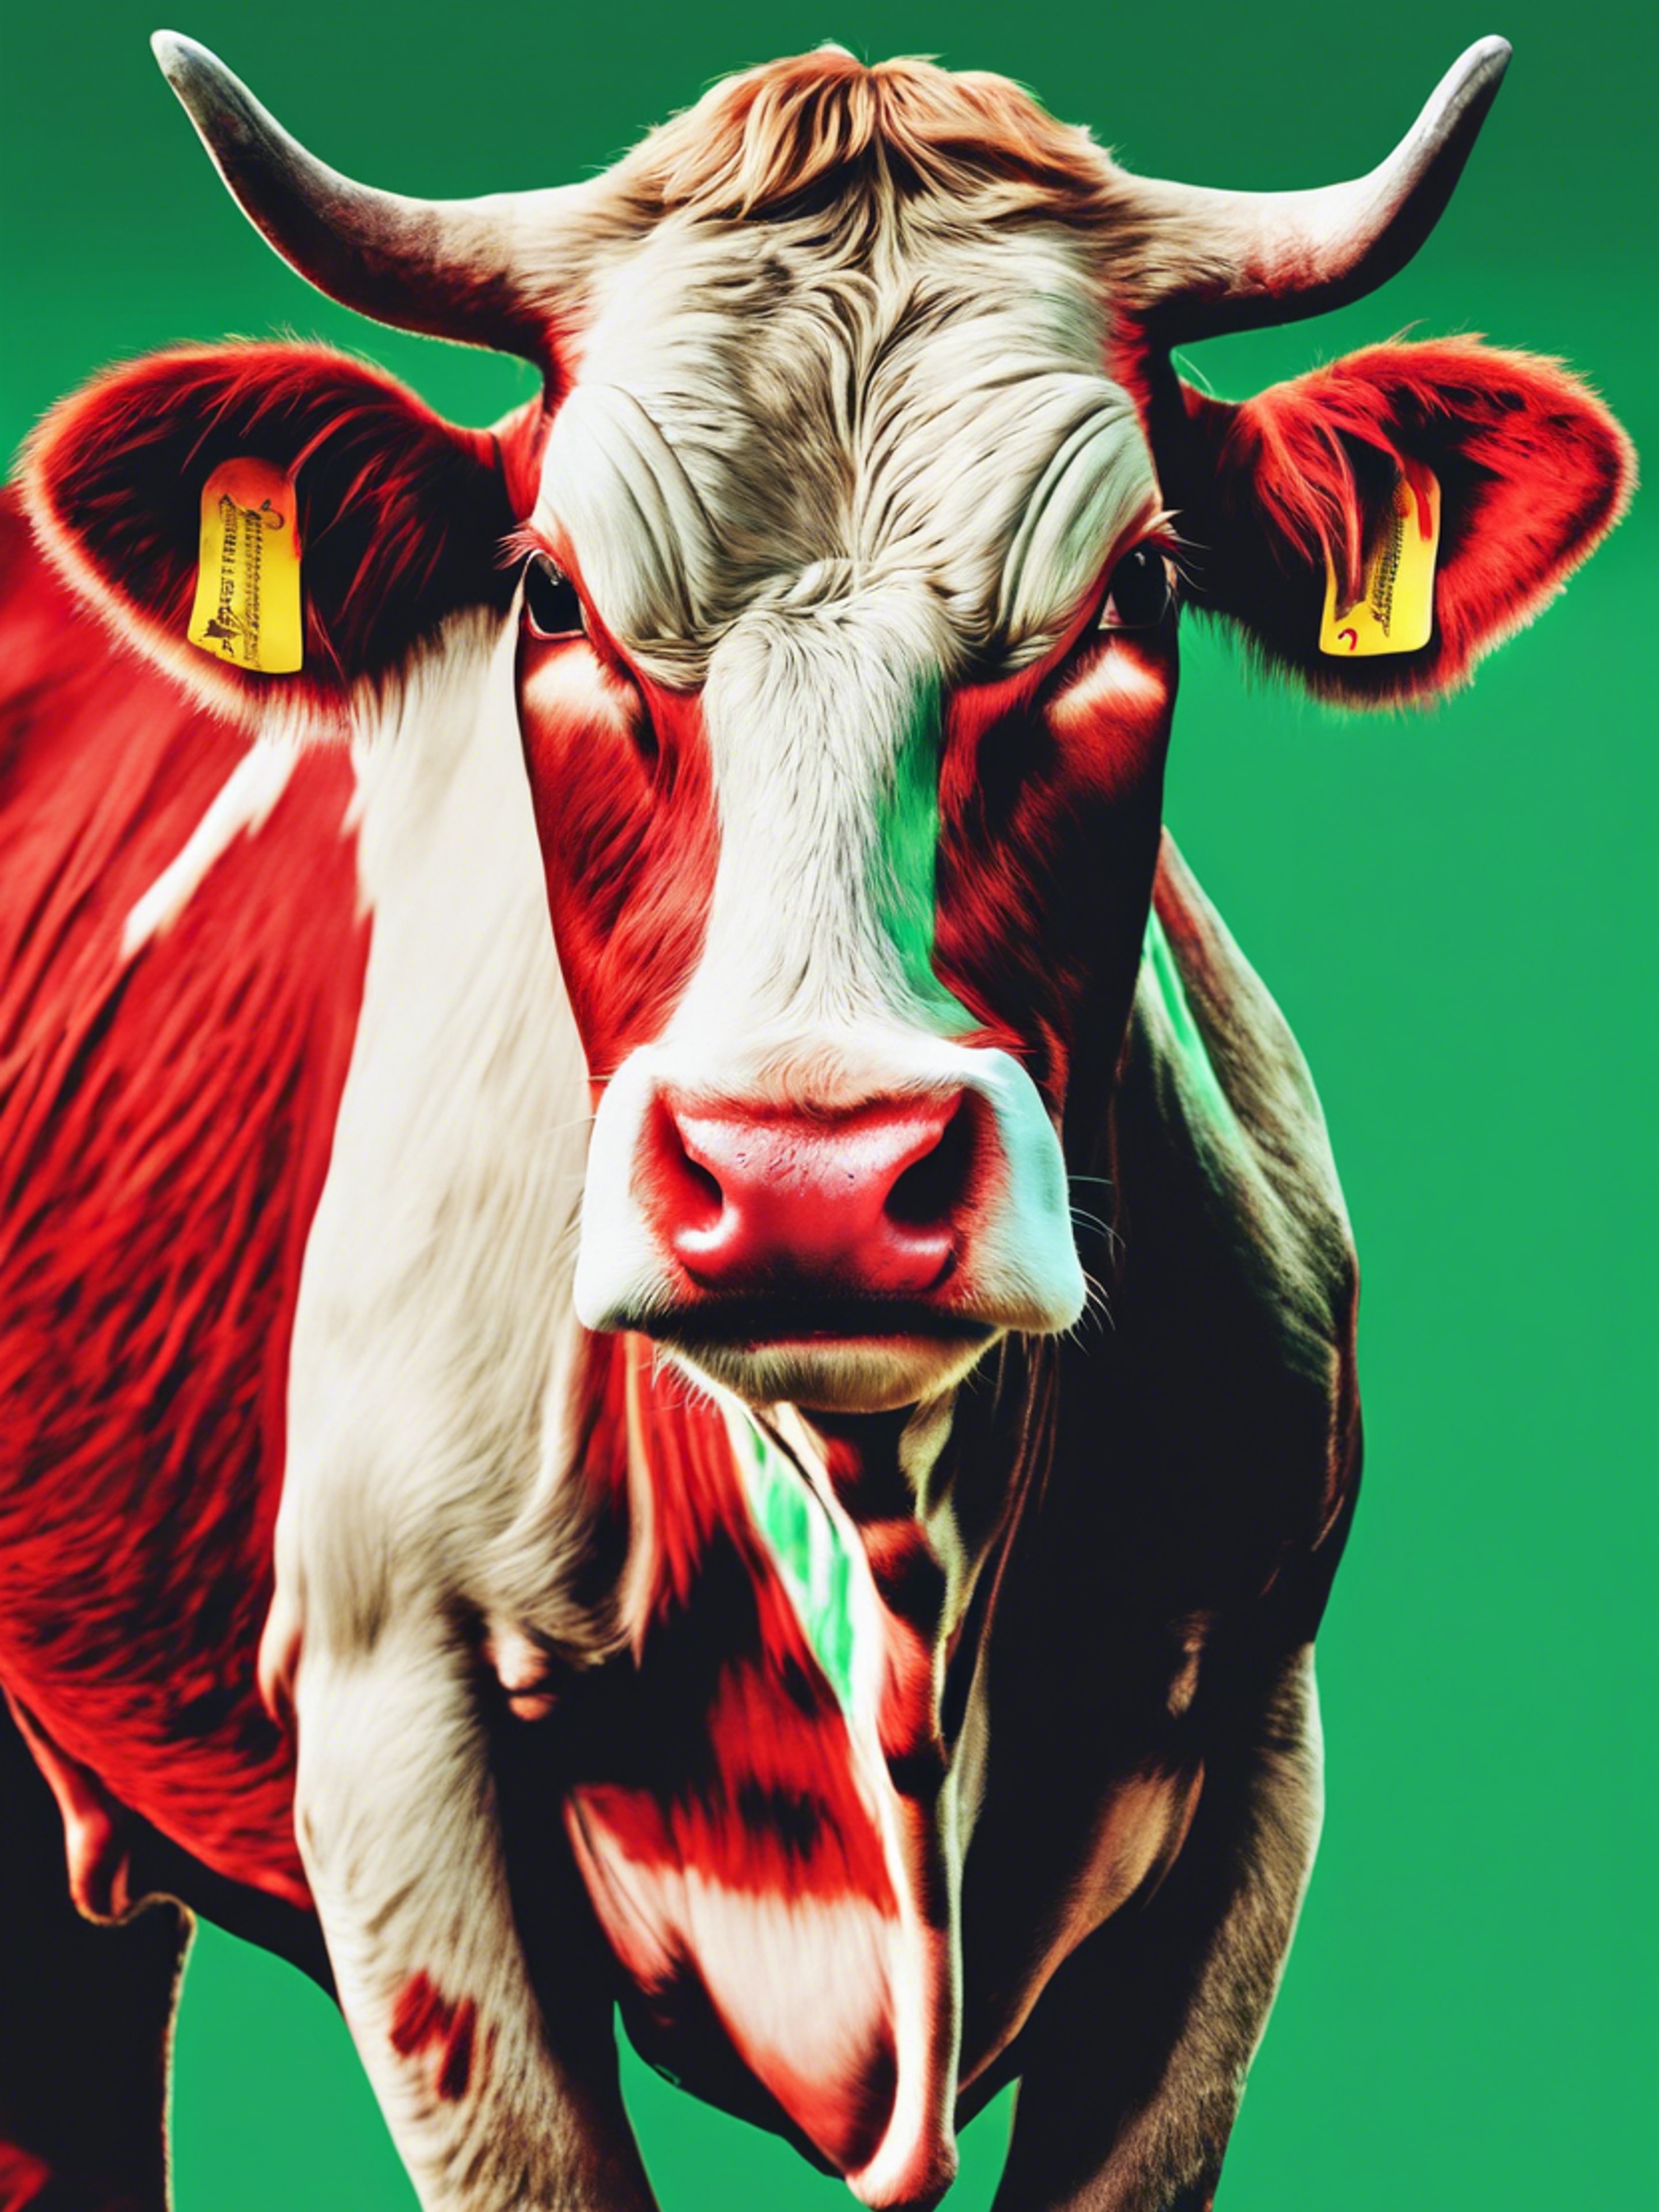 Pop-art style cow print in a palette of red and green. Tapet[5b65906f2b9649418c8c]